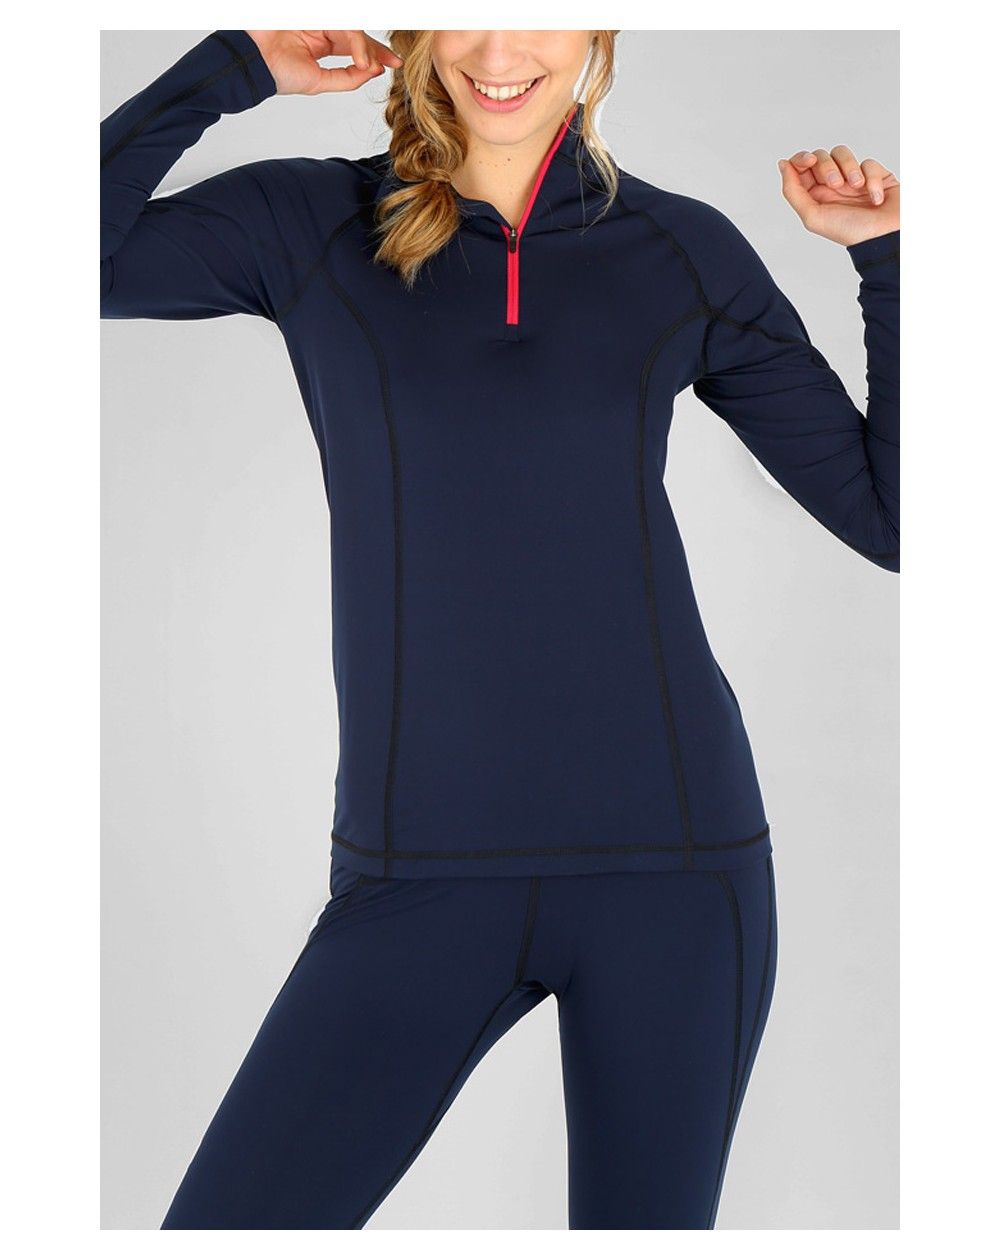 tee-shirt thermique col demi-zip Olivia navy